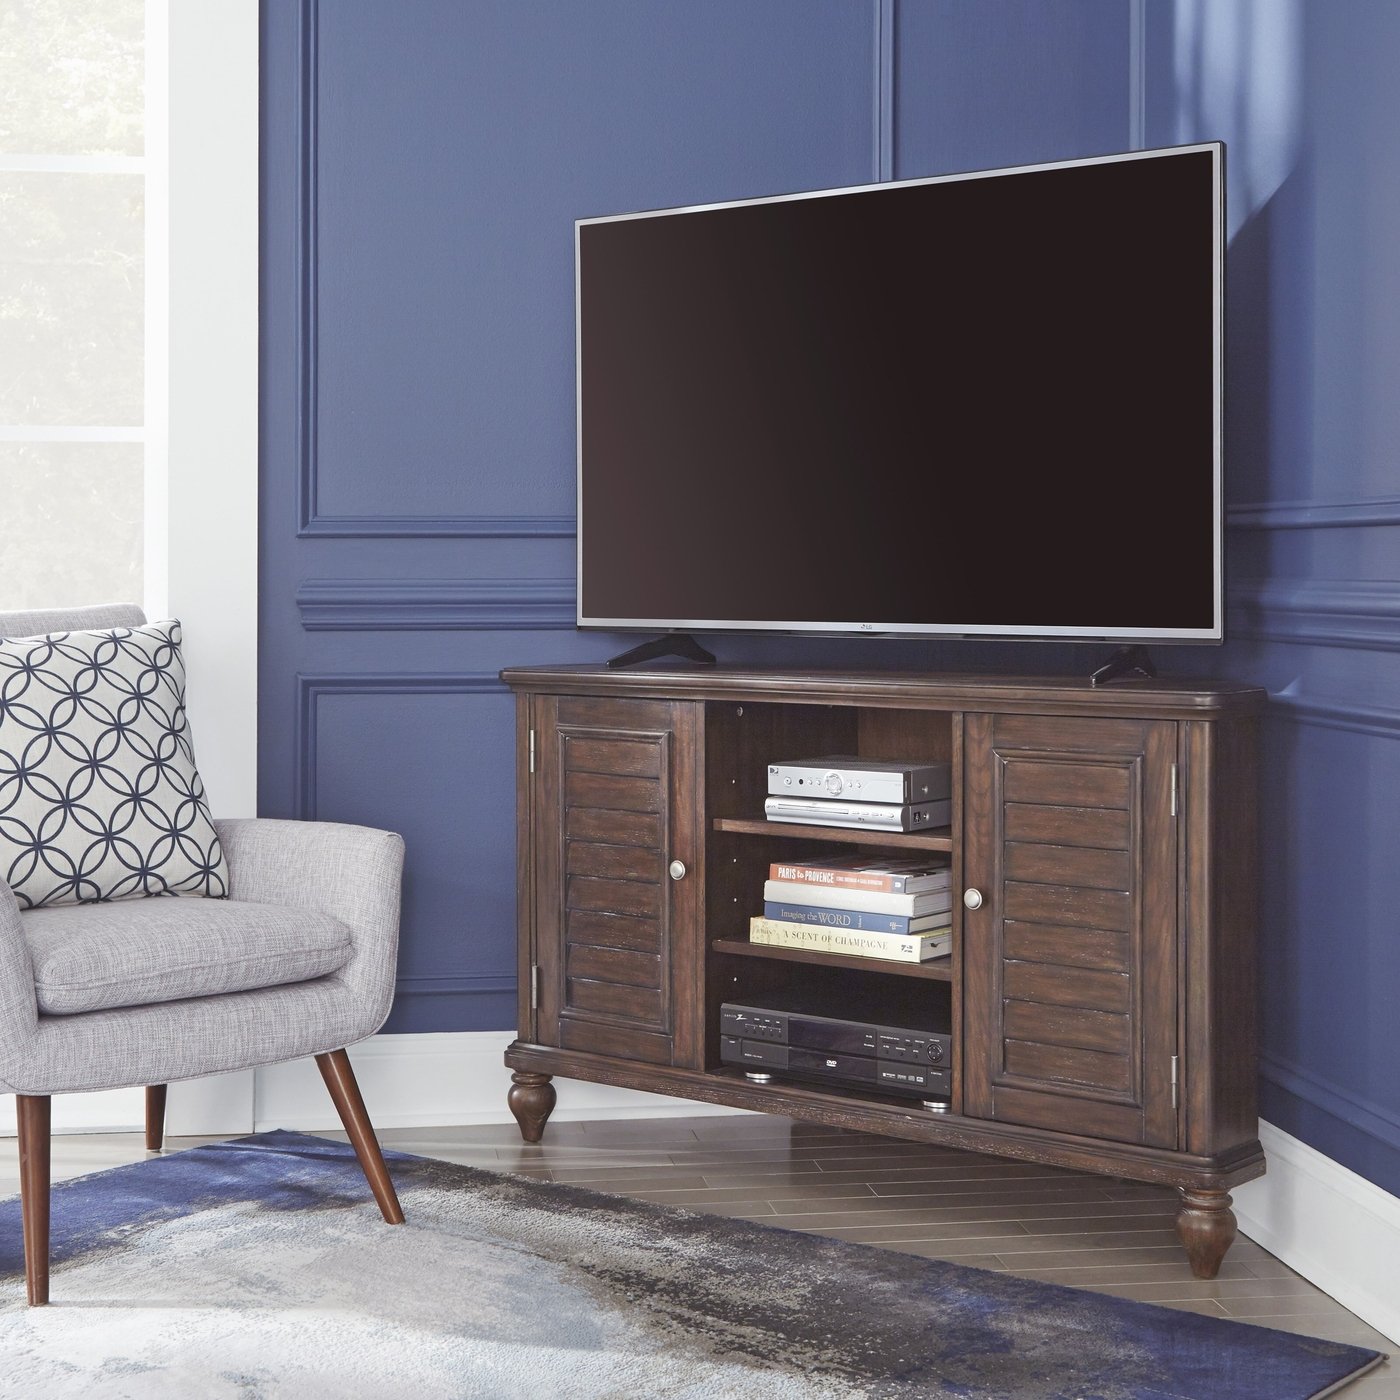 5 Expert Tips To Choose A TV Stand - VisualHunt